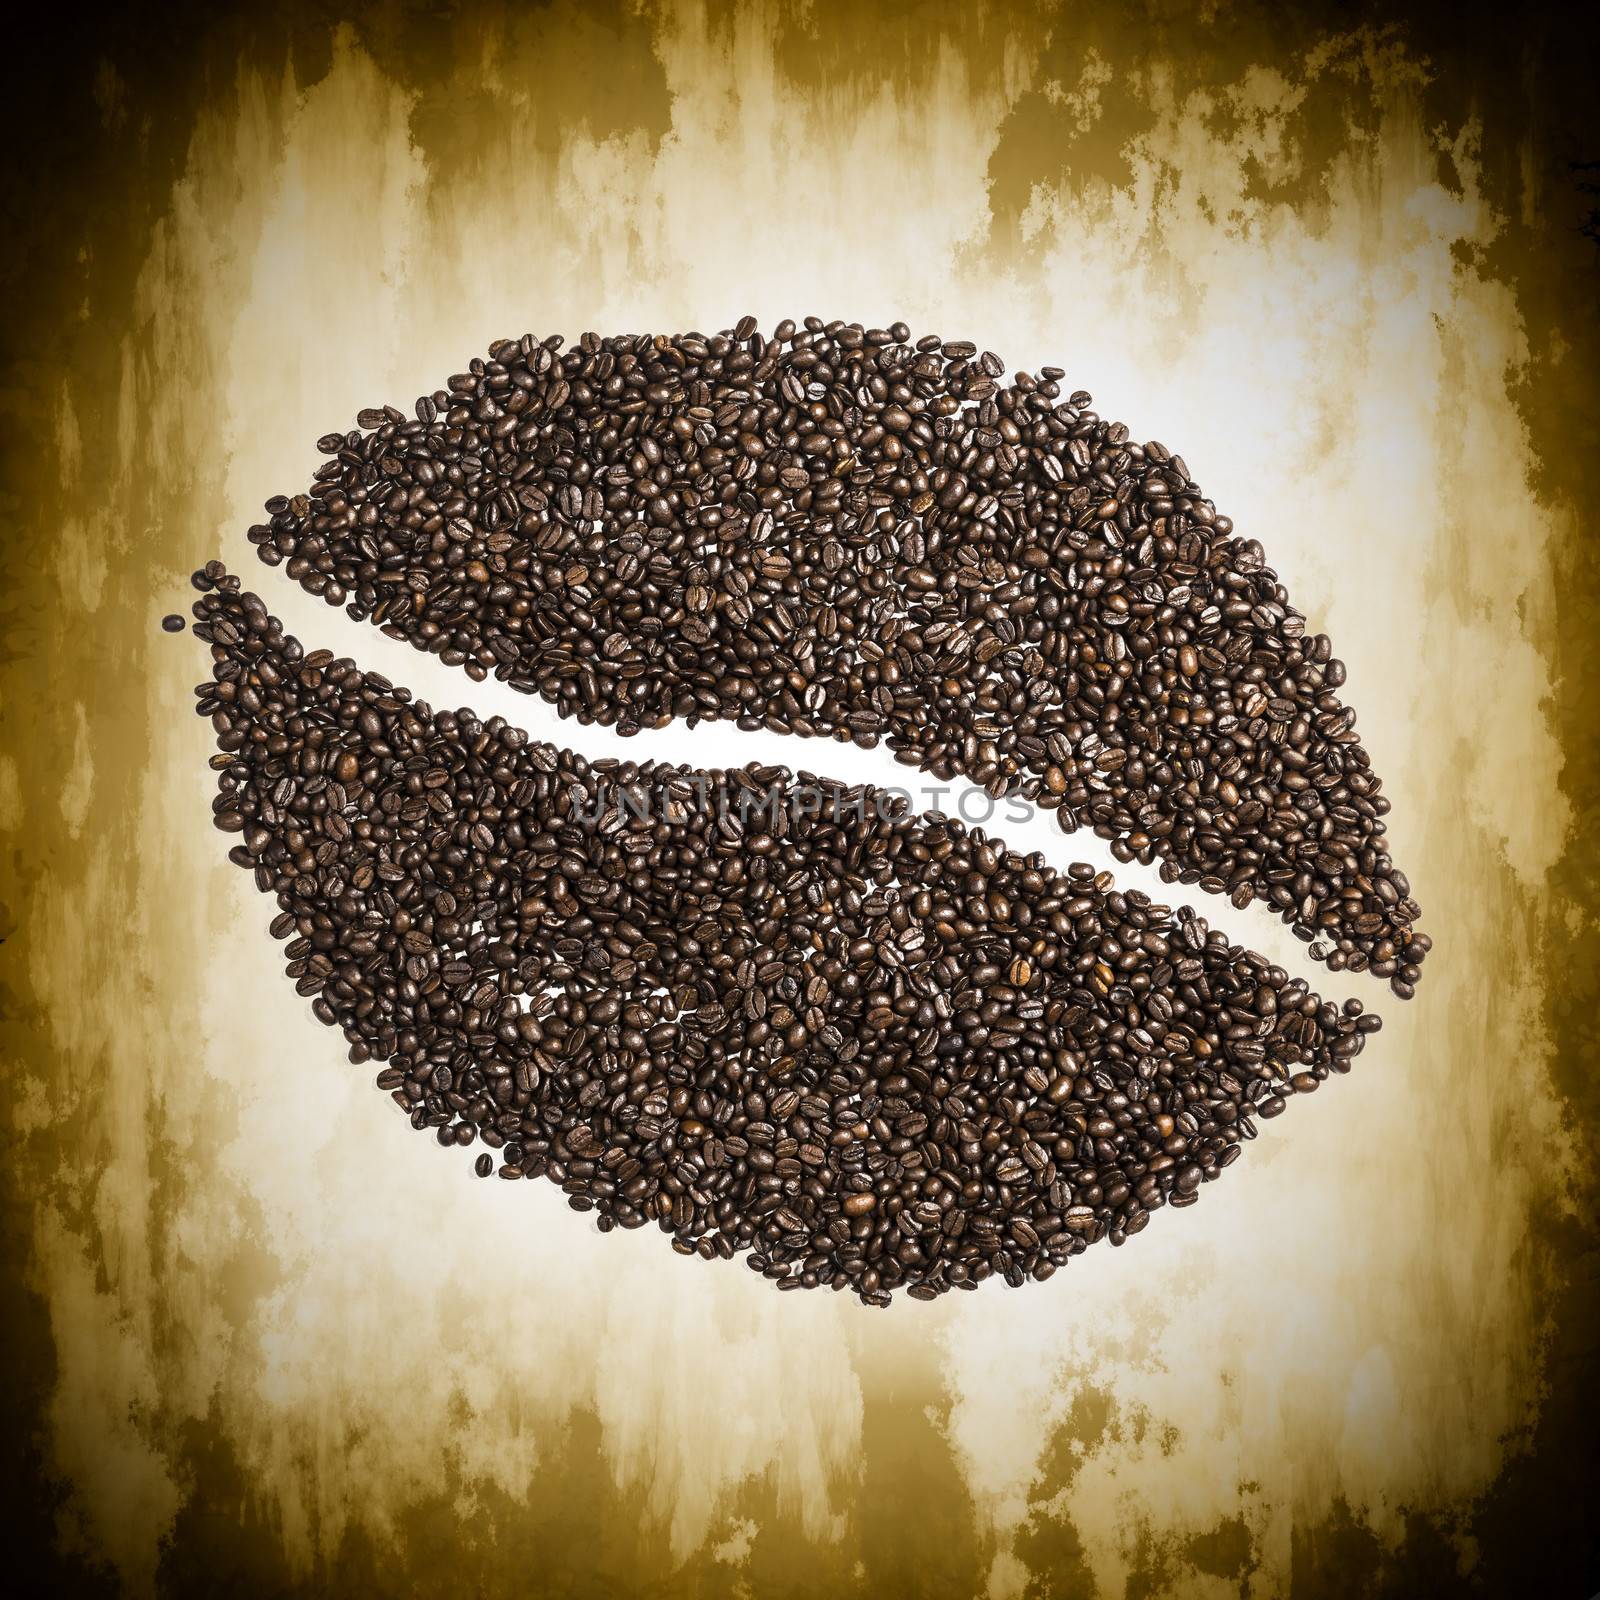 Image of a coffee bean made from coffee beans